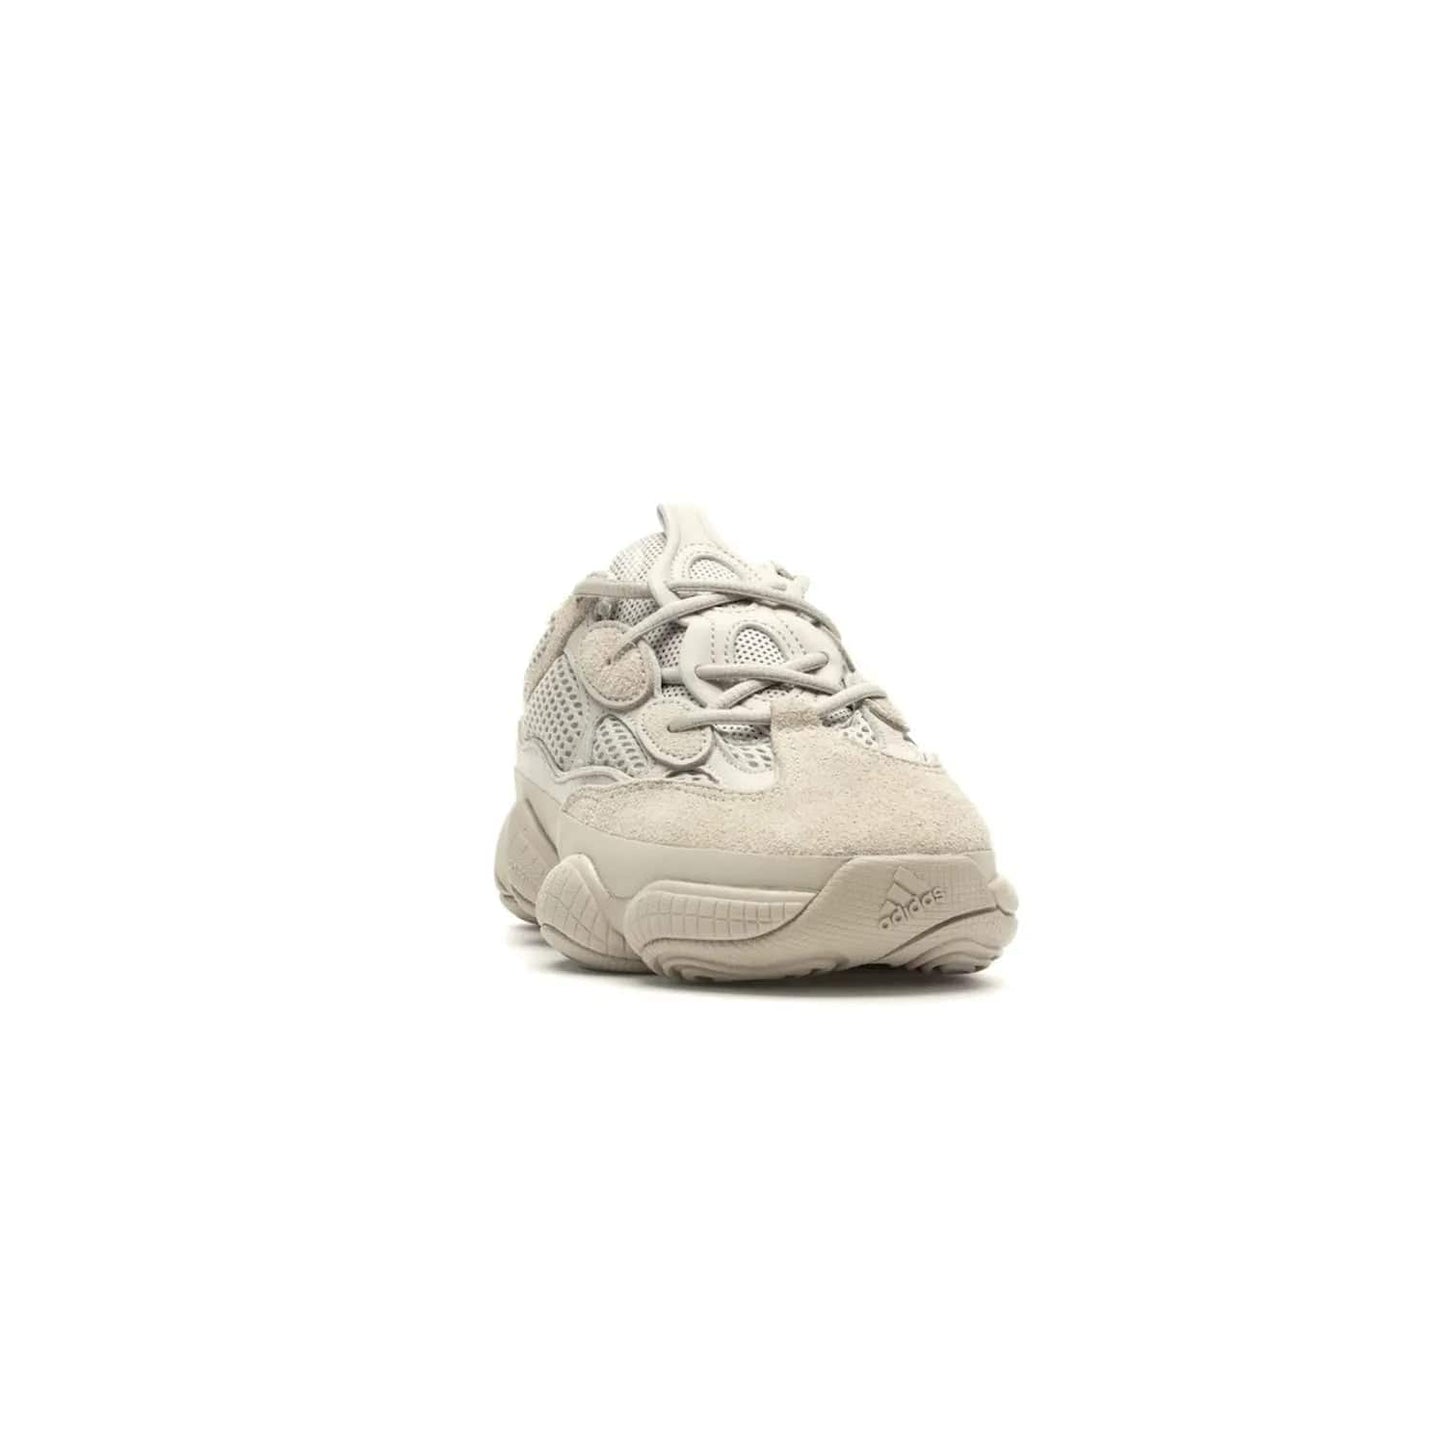 adidas Yeezy 500 Blush - Image 8 - Only at www.BallersClubKickz.com - Step up your sneaker game with the Adidas Yeezy 500 Blush. Monochromatic pale pink palette, hiking-inspired suede/mesh construction, plus adiPRENE sole for comfort and performance. Get the Adidas Yeezy 500 and experience true style and comfort.